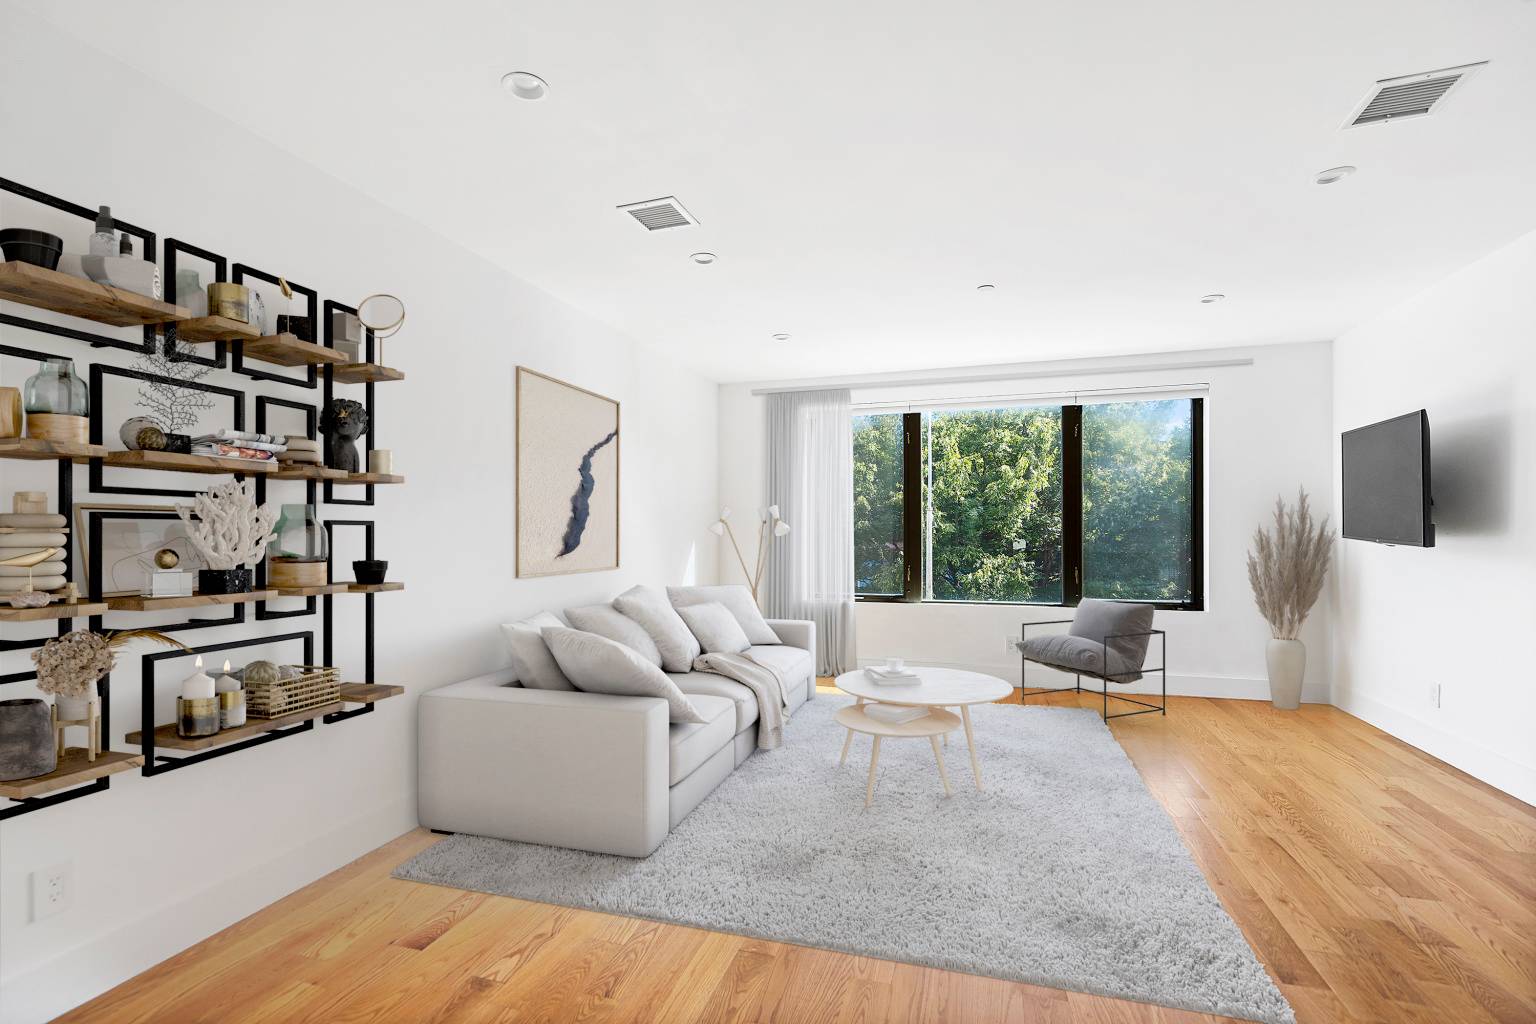 Offered by Tricia Lee at Compass Open House Only New 3 Bed 2 Ba Duplex condo bordering Clinton Hill Bed Stuy in this all new development condo building.